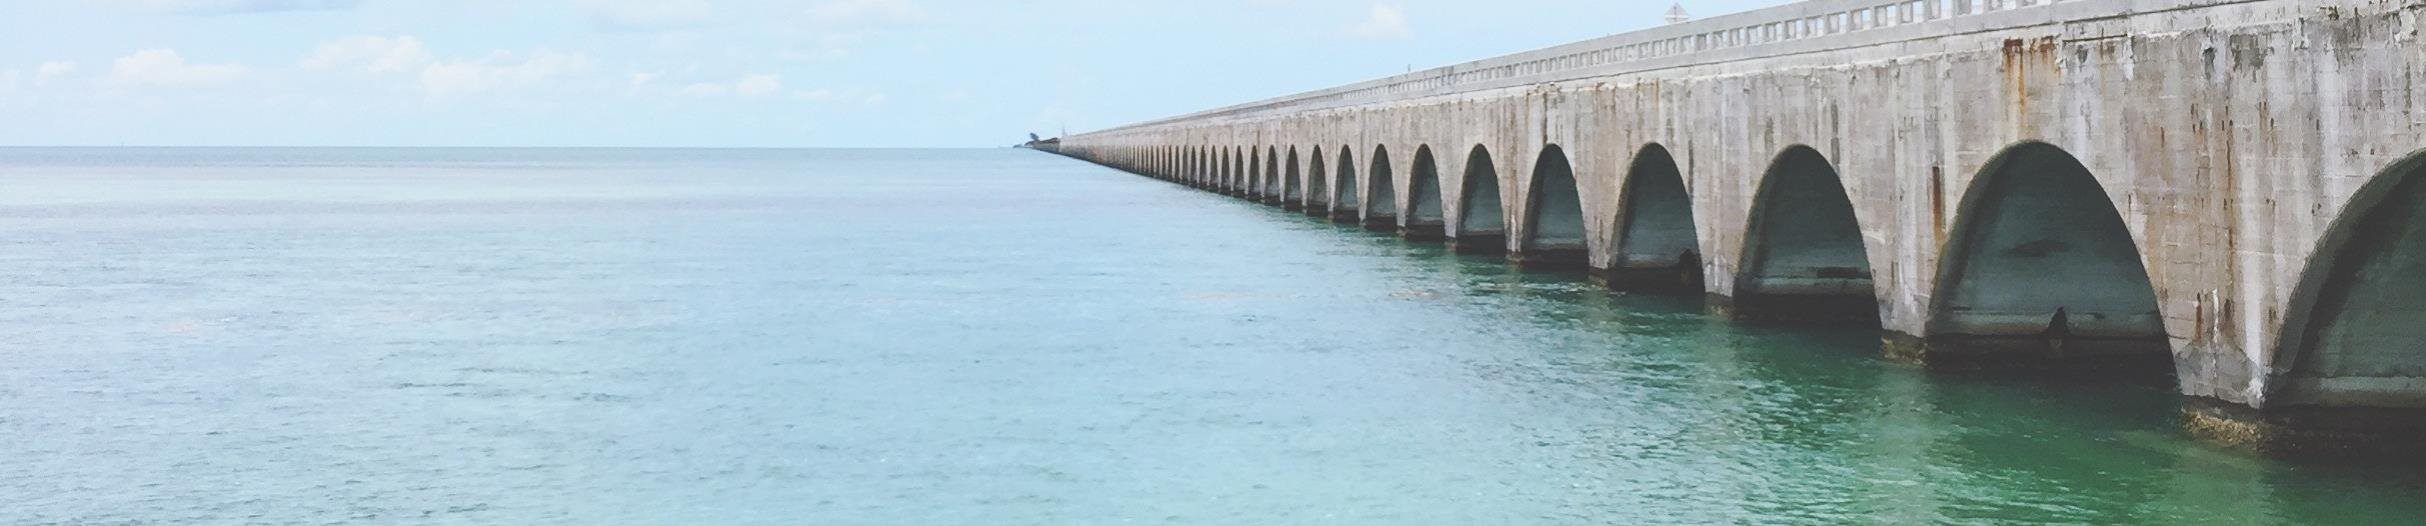 A long bridge next to a large body of water on a clear day